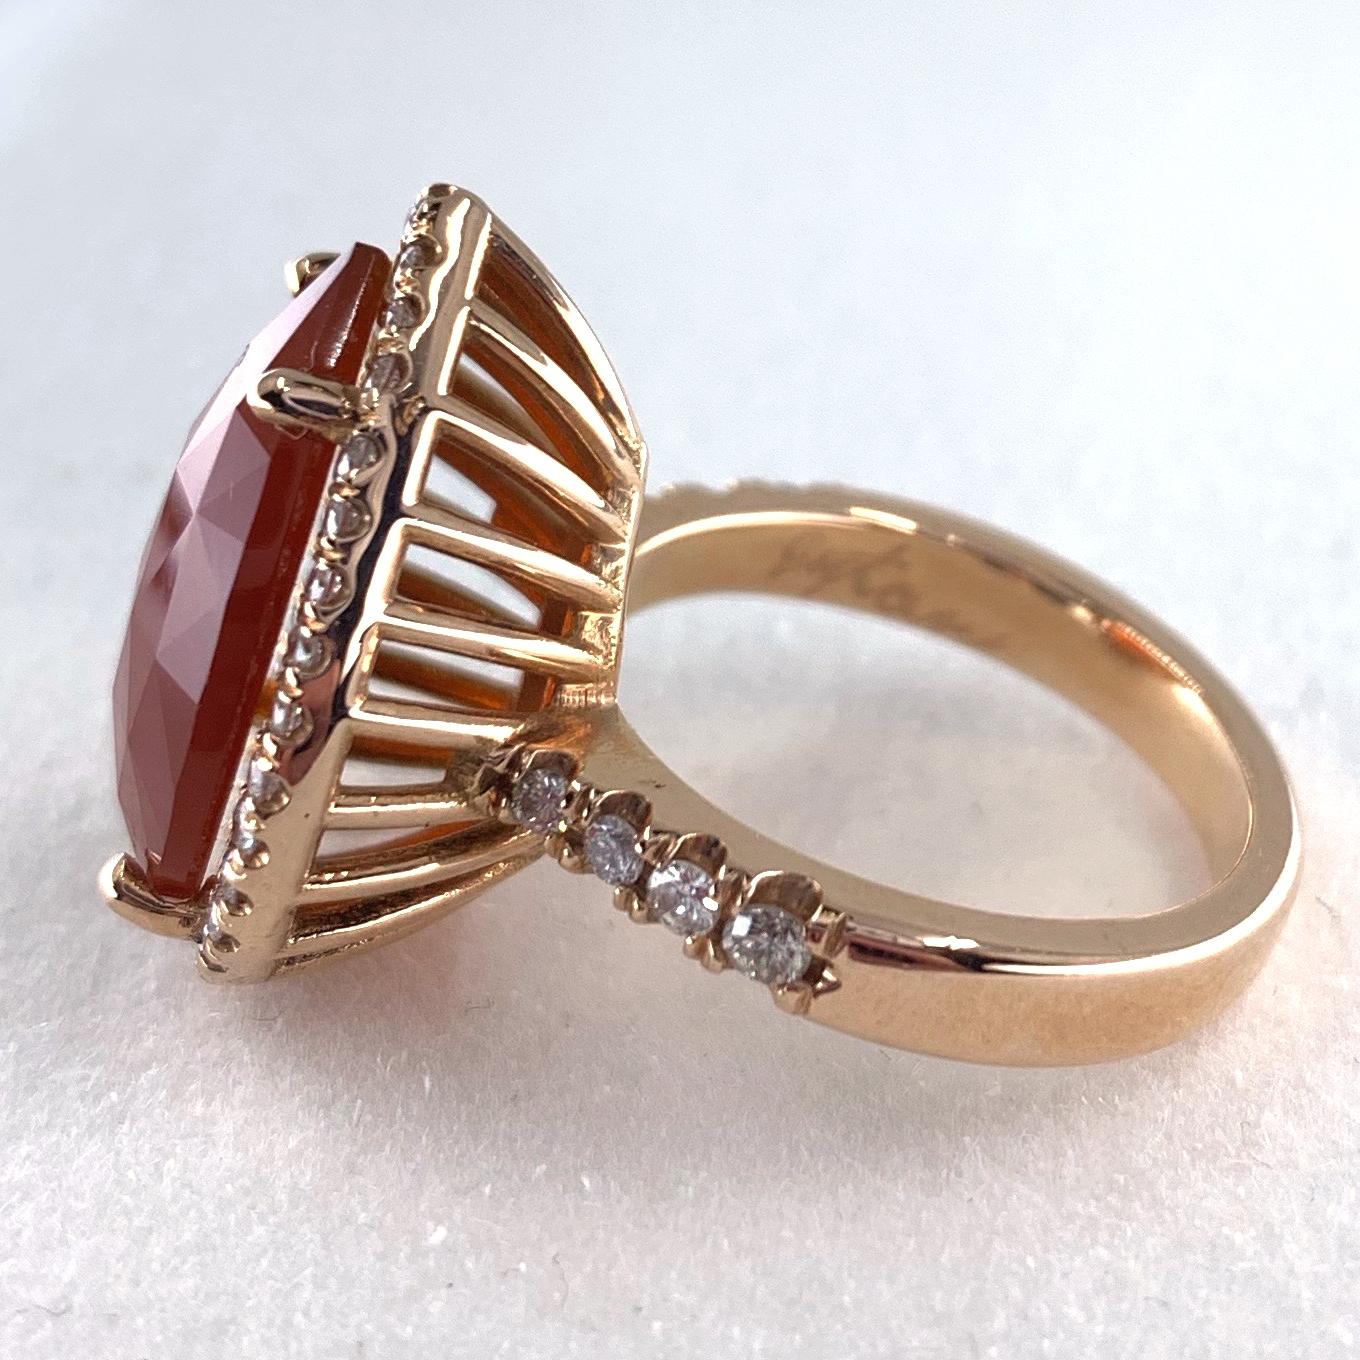 Women's Faceted 4.0 Carat Carnelian Slice Pear-Shaped Diamond Halo Ring in Rose Gold